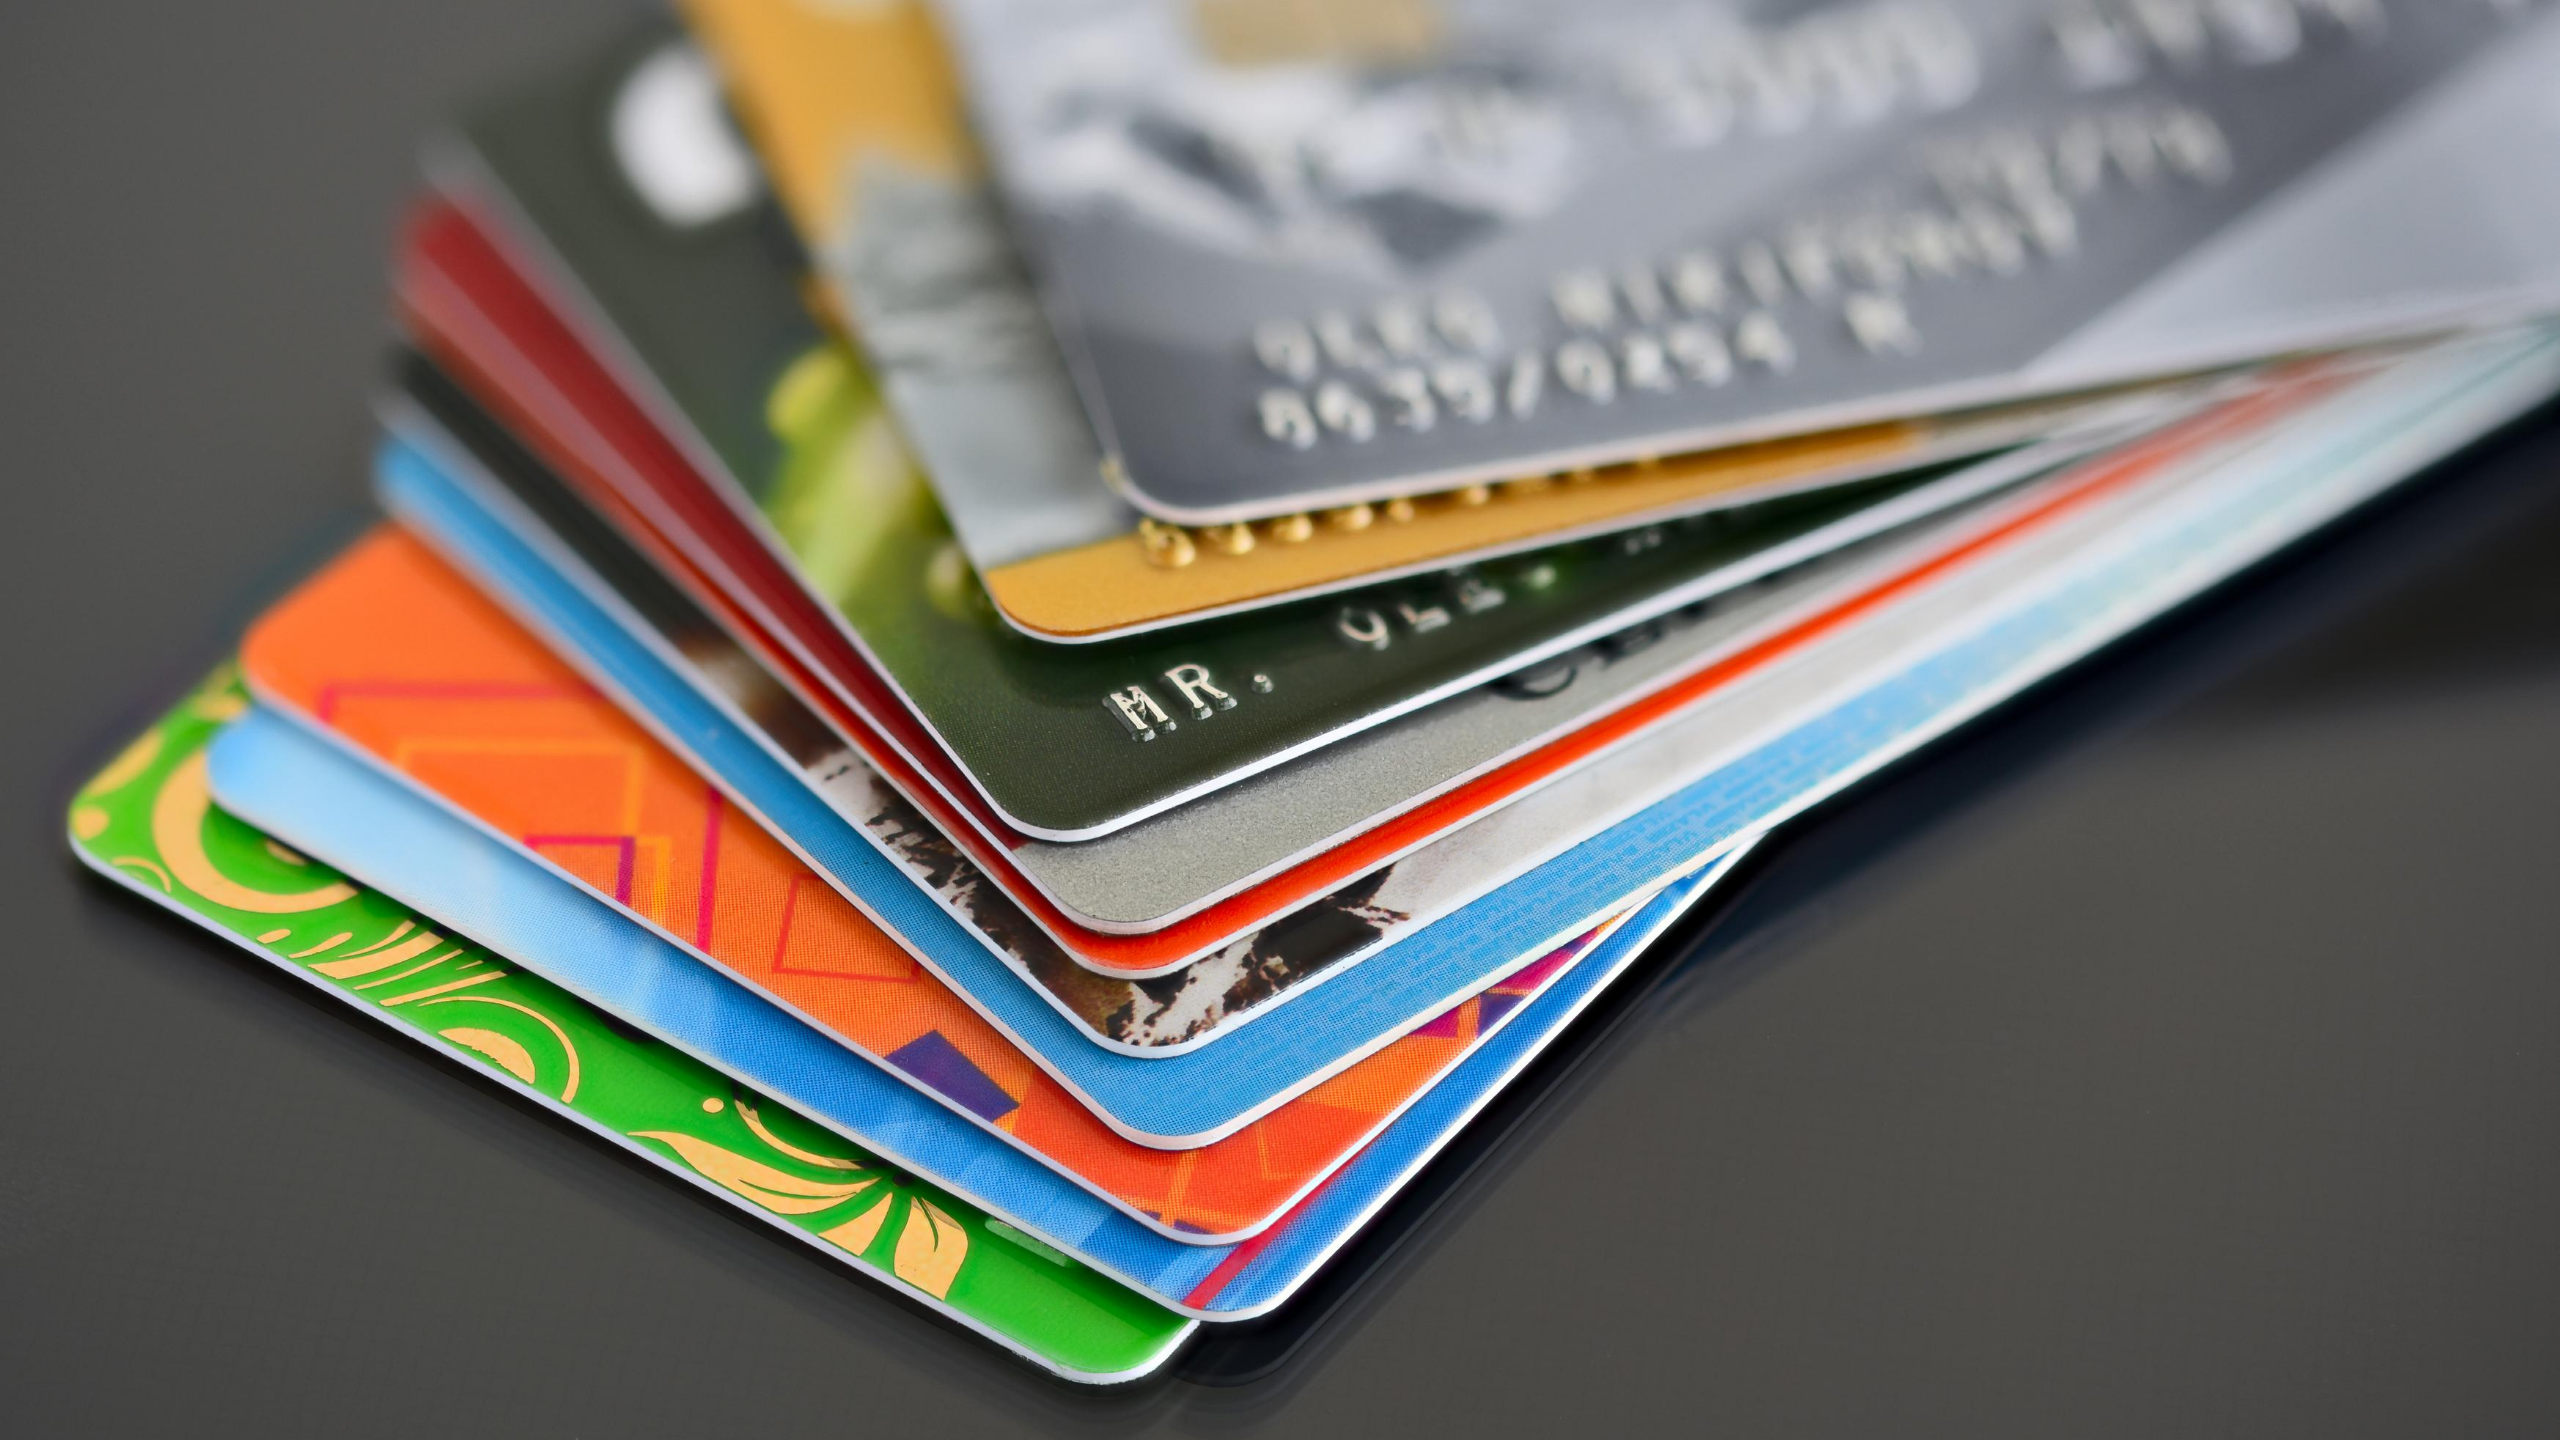 13 Signs You Might Have Credit Card Problems (And How to Fix It)